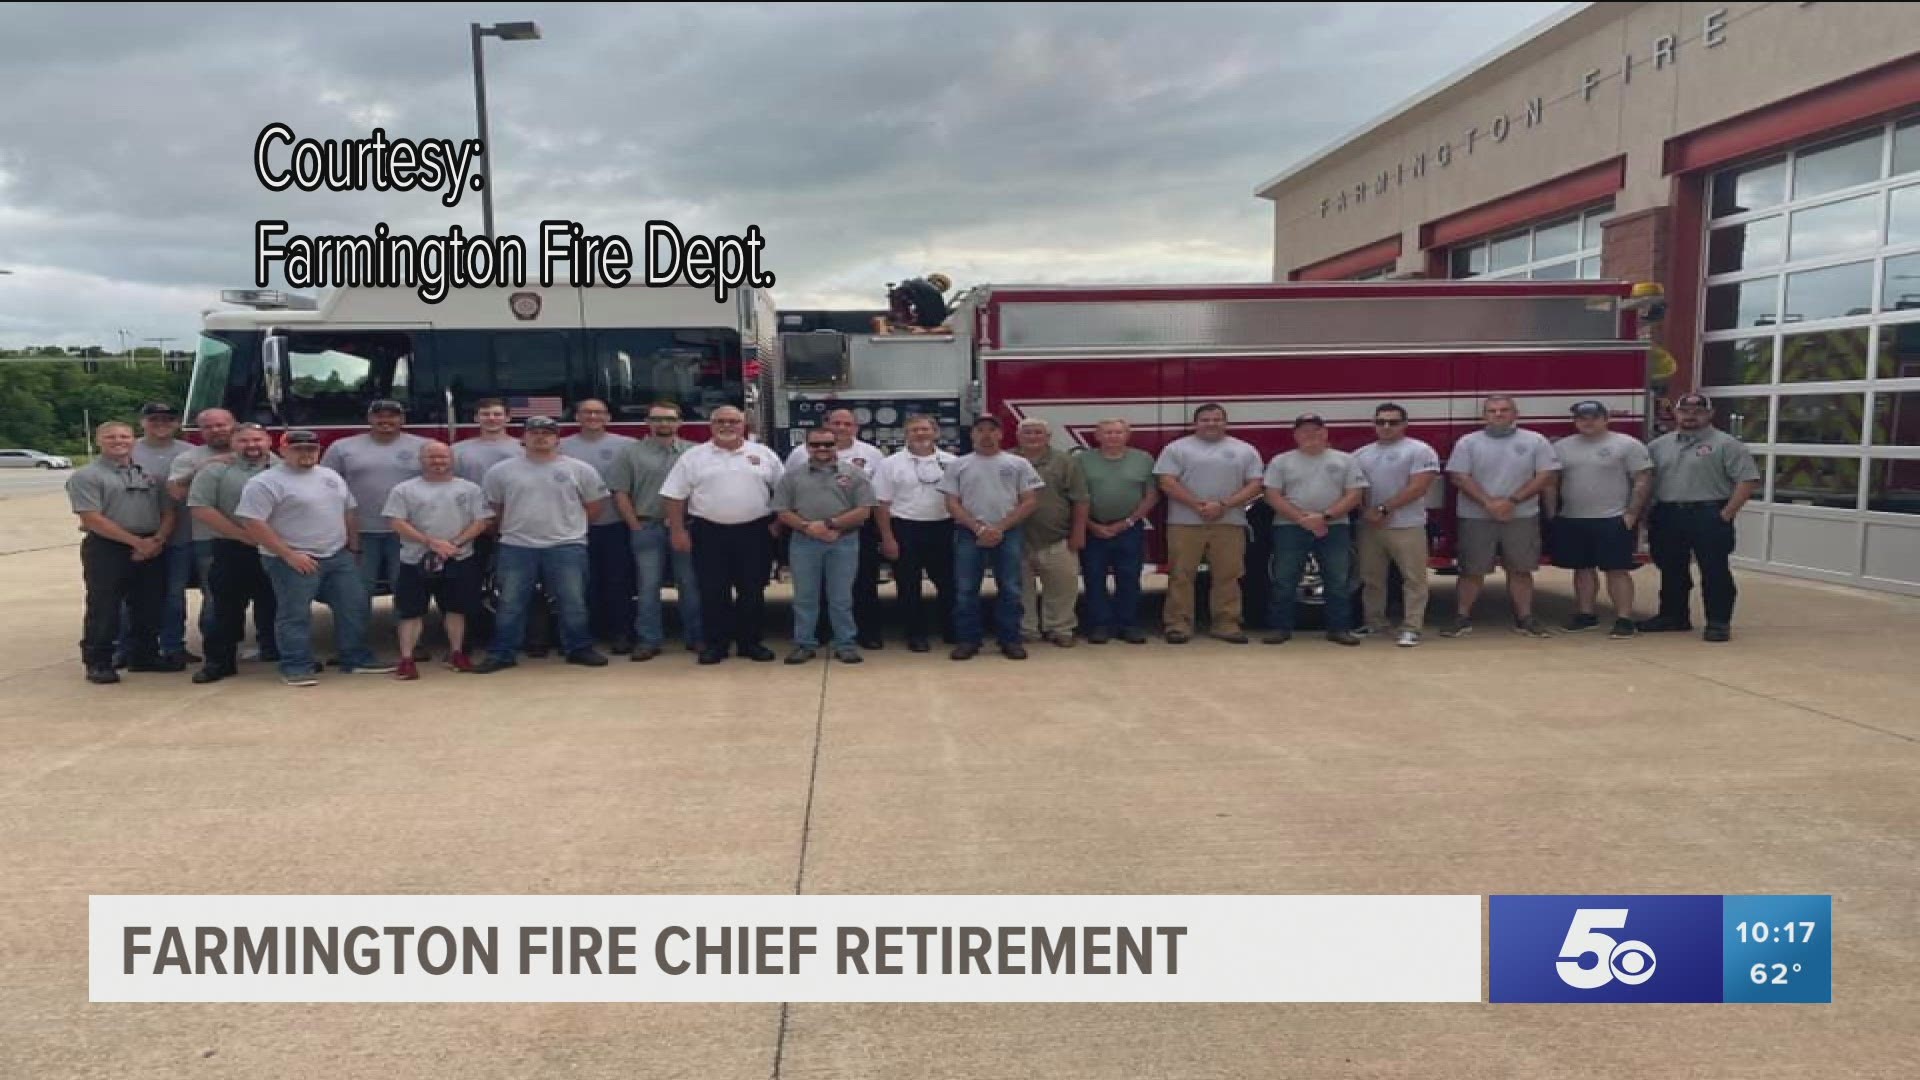 The department held a parade by his house in his honor Tuesday (May 26).